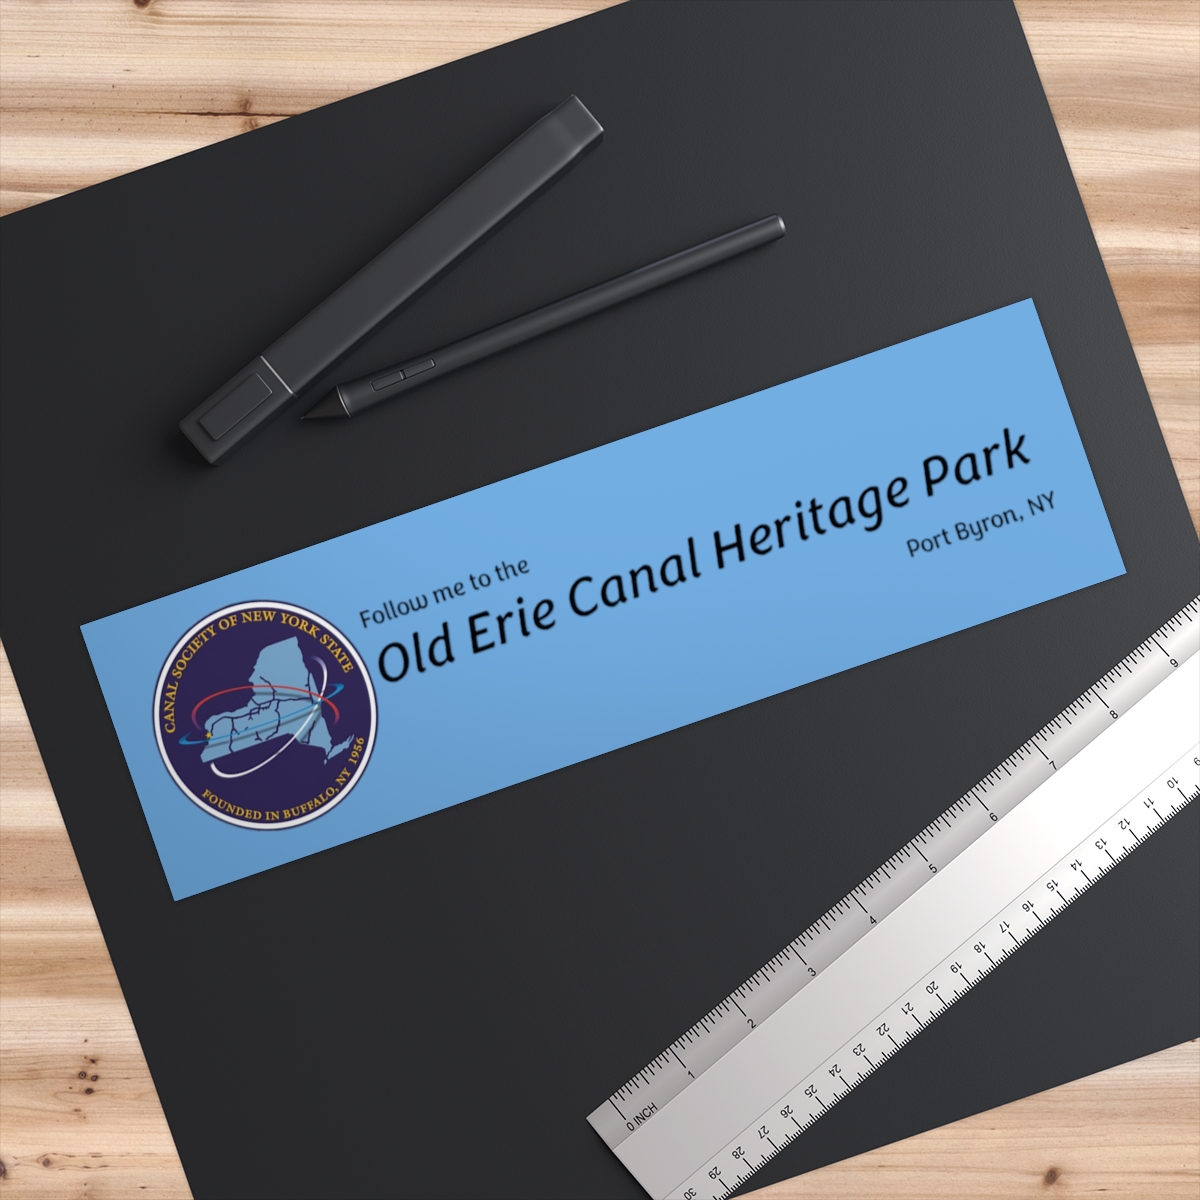 Old Erie Canal Heritage Park Bumper Stickers product thumbnail image